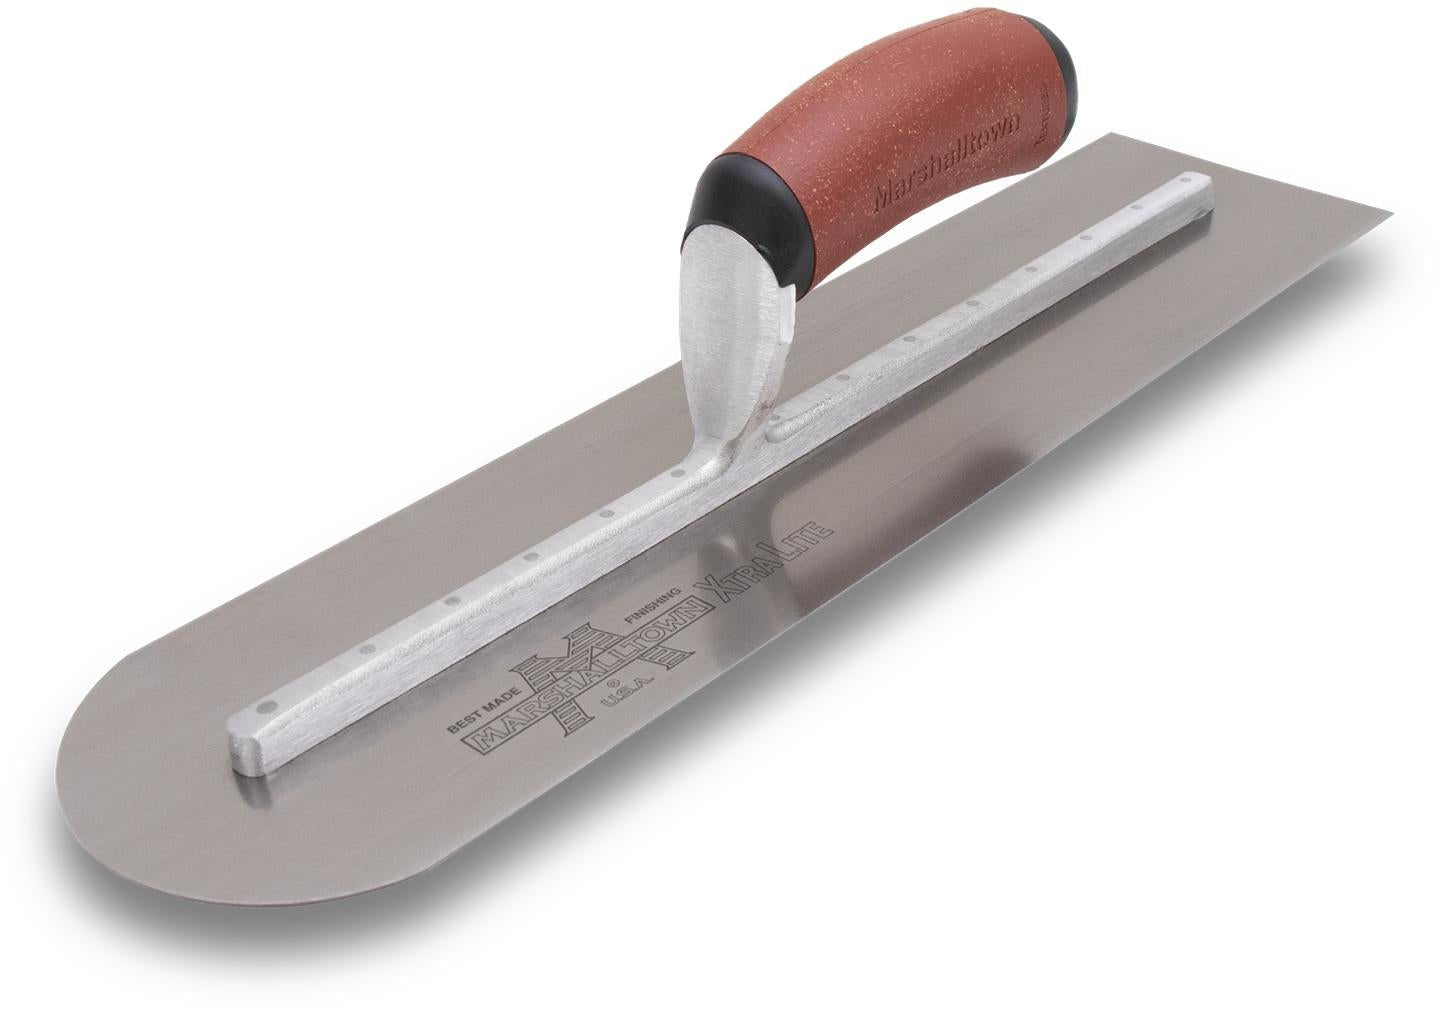 Marshalltown  MXS64REDC - 14 X 4 Rounded Front Finishing Trowel - DuraCork Handle